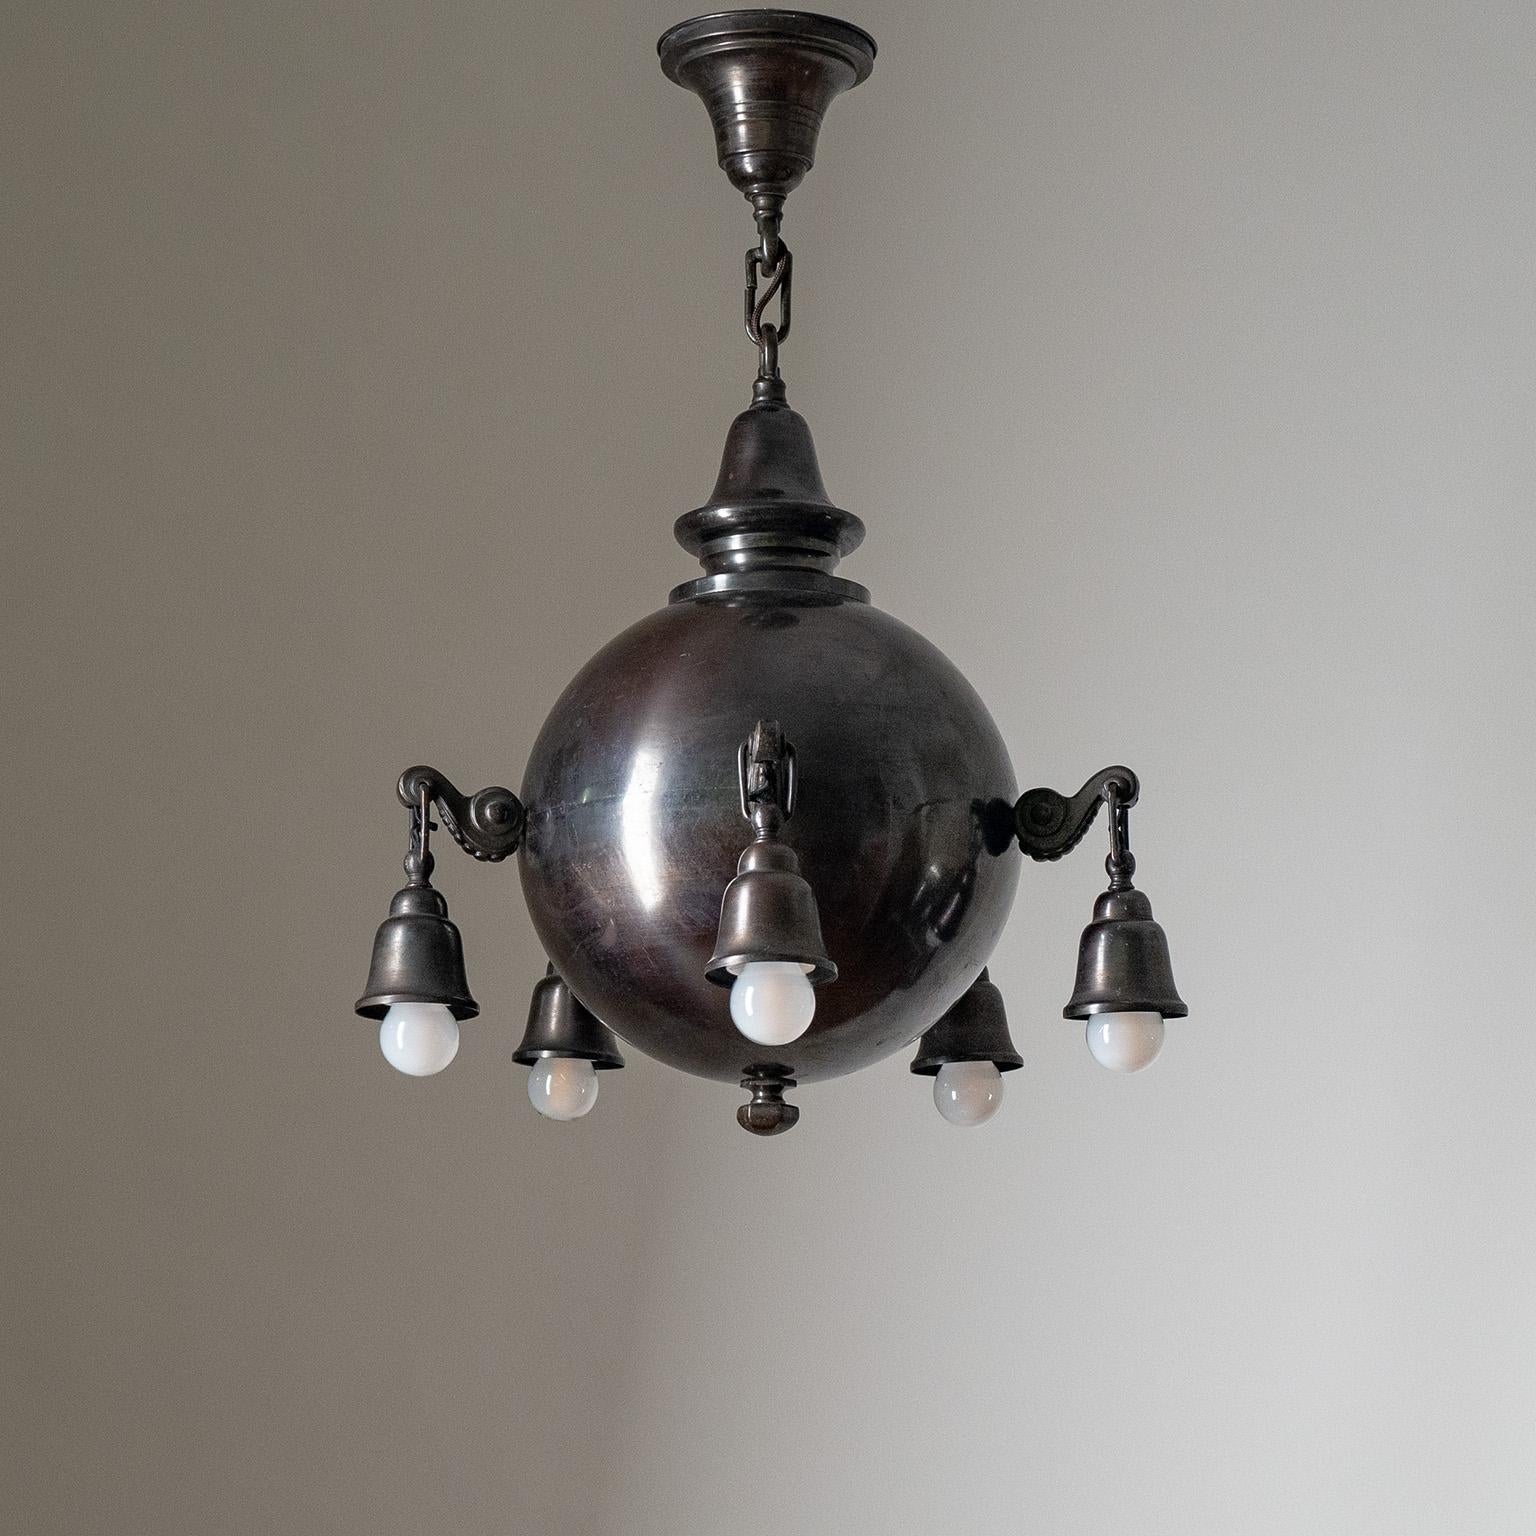 Rare sculptural early 20th century chandelier in dark patinated copper. A large central copper globe (circa 30cm/12″) with five sculpted arms, each with an original brass and ceramic E27 socket and new wiring.
Measures: Height 69cm (27″), Diameter